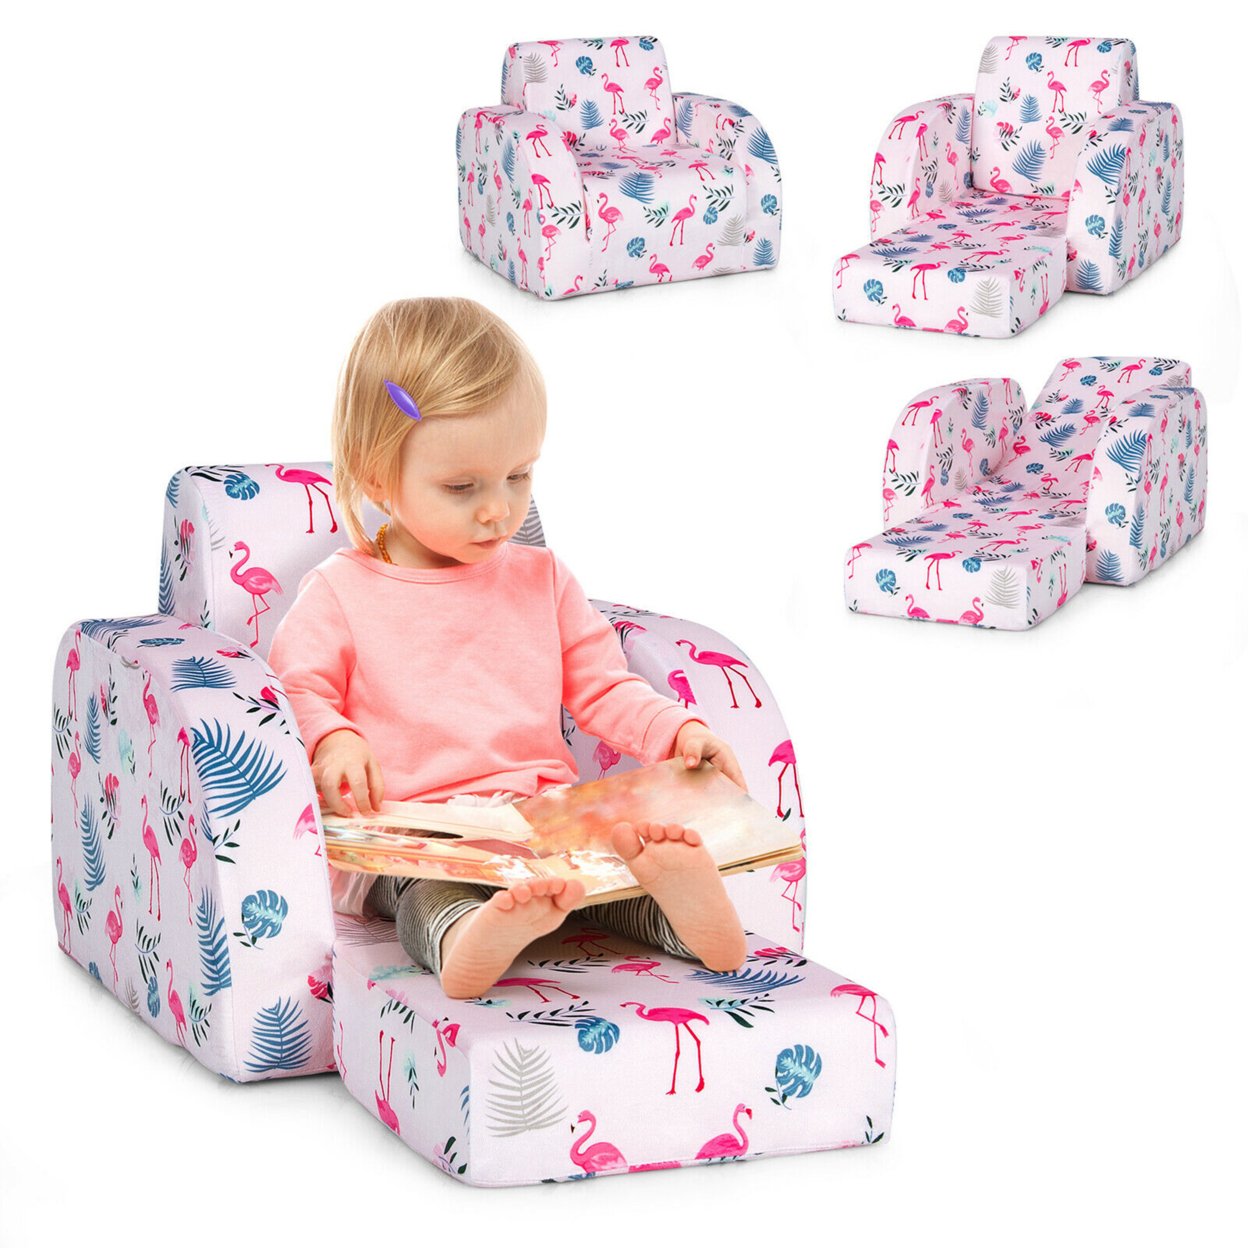 3-in-1 Convertible Kid Sofa Bed Flip-Out Chair Lounger For Toddler - Pink